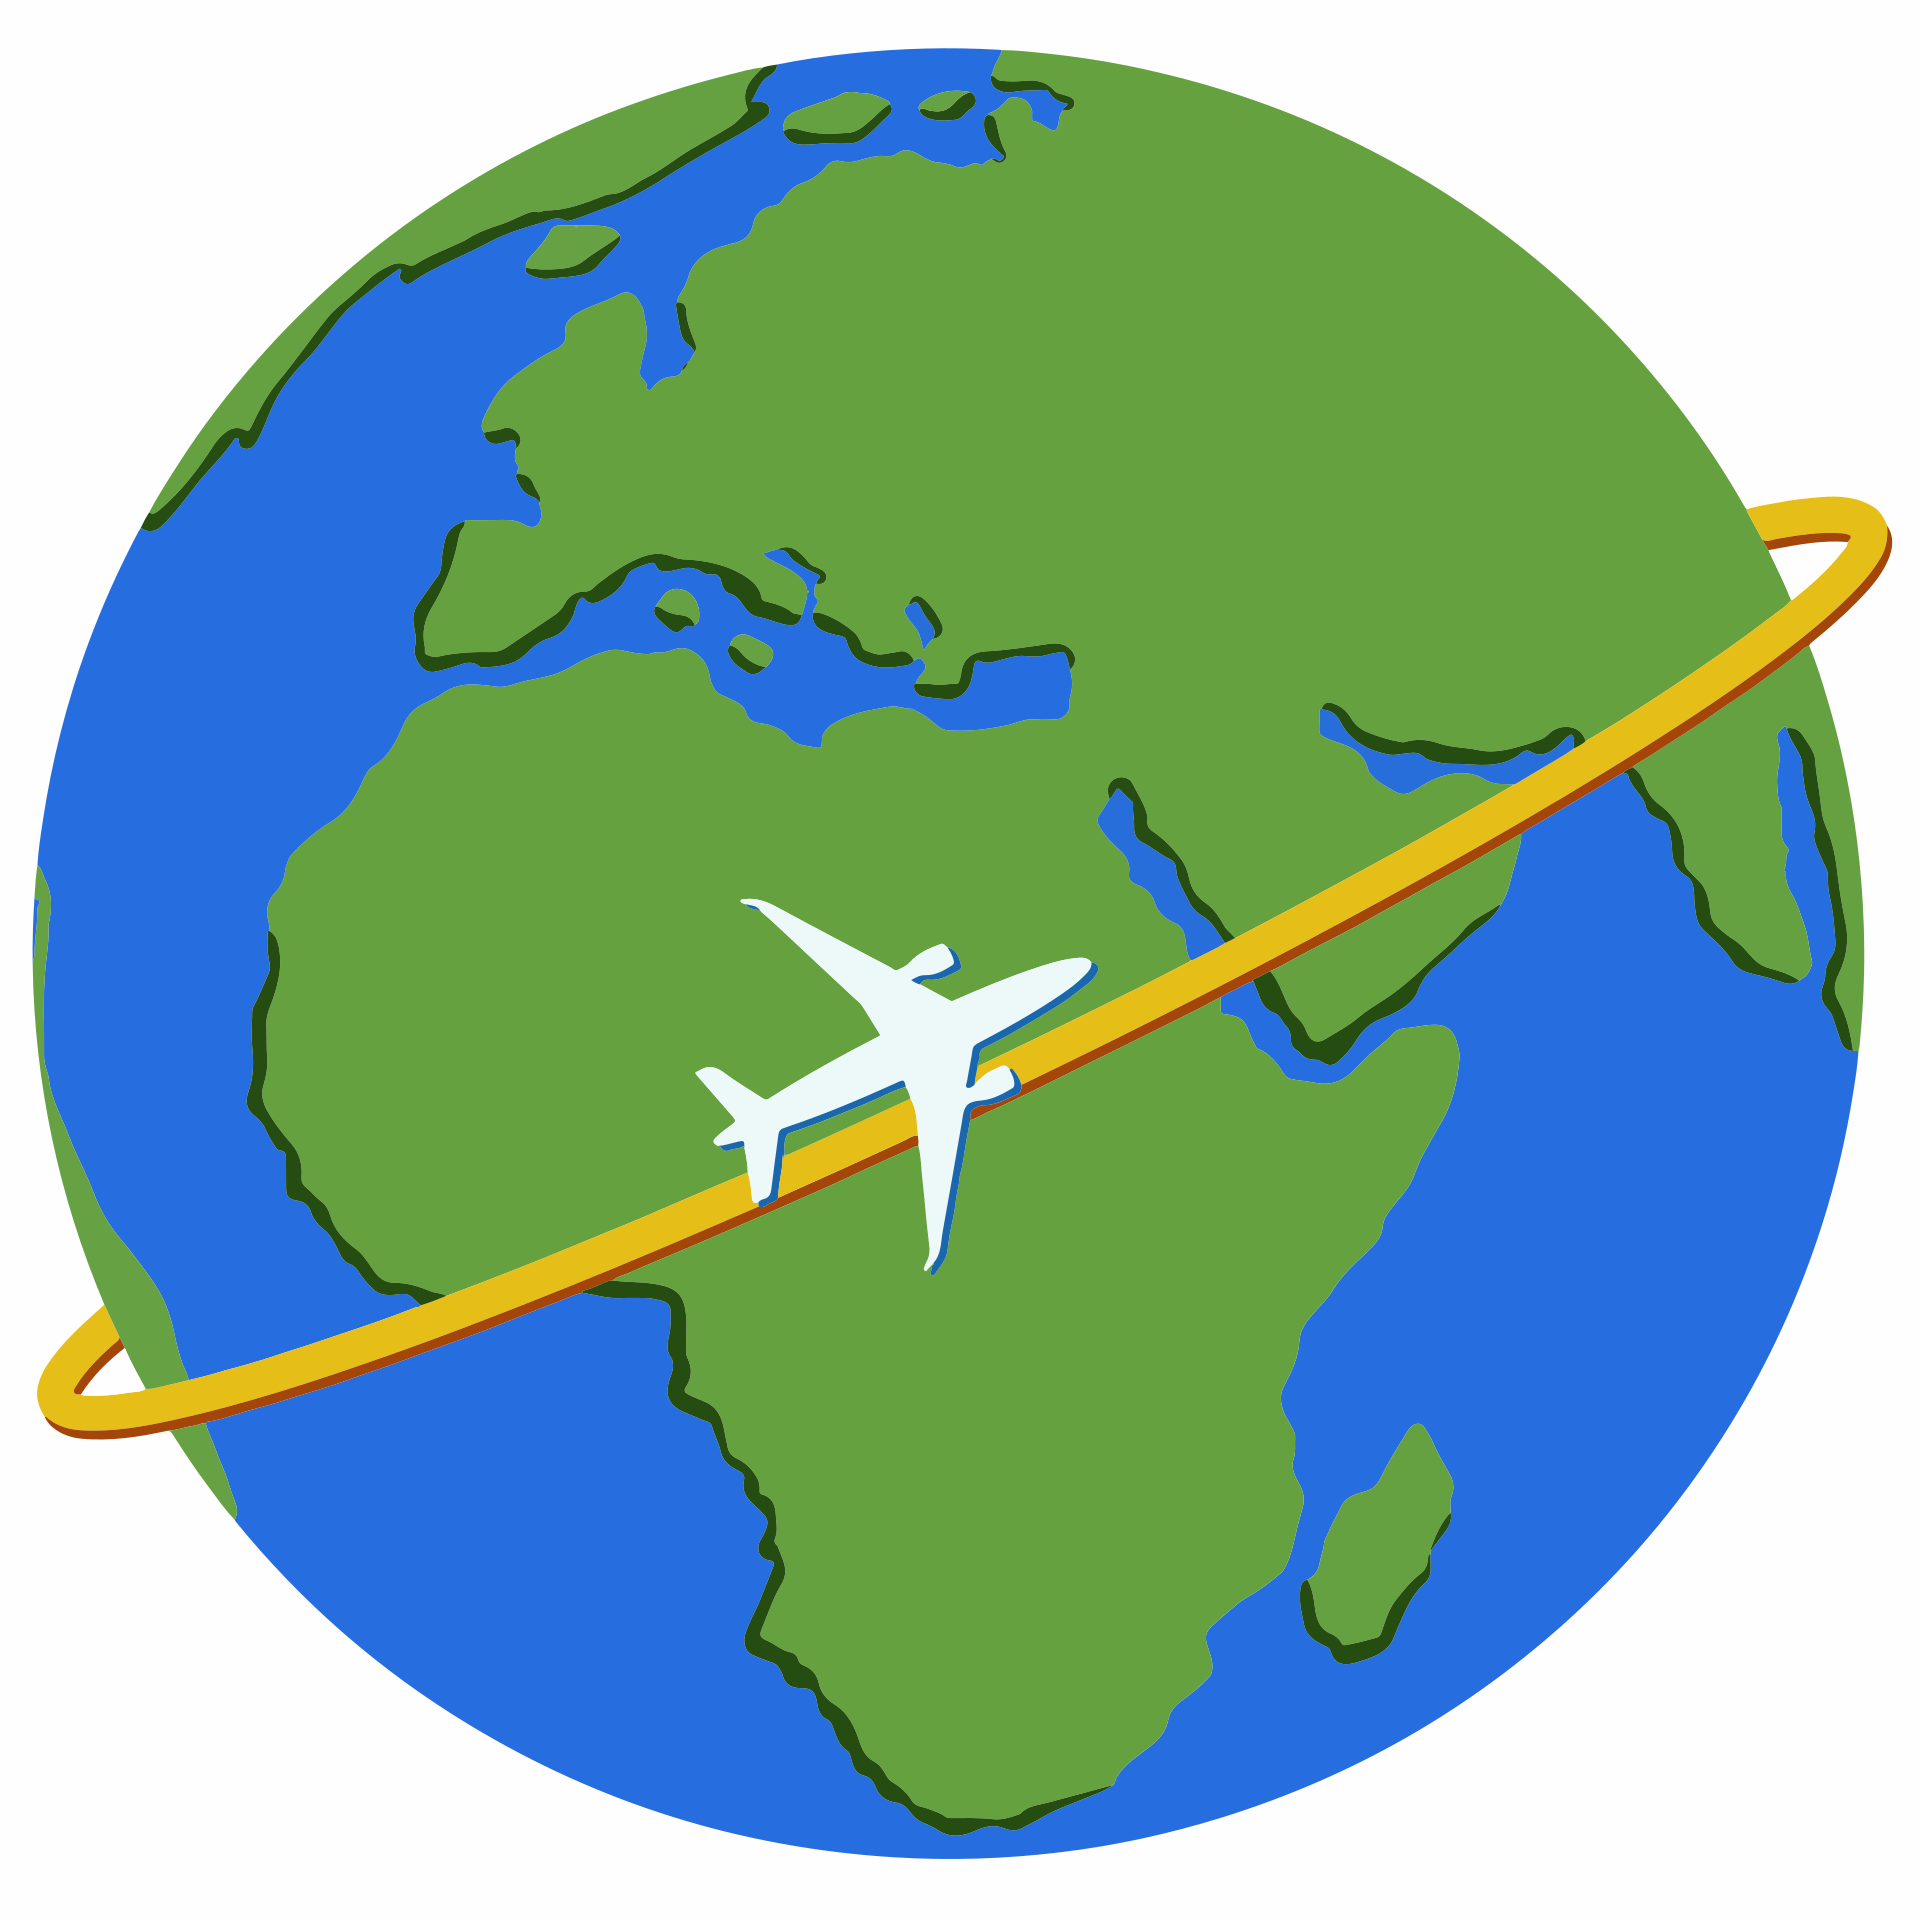 Illustration of a plane circumnavigating the Earth